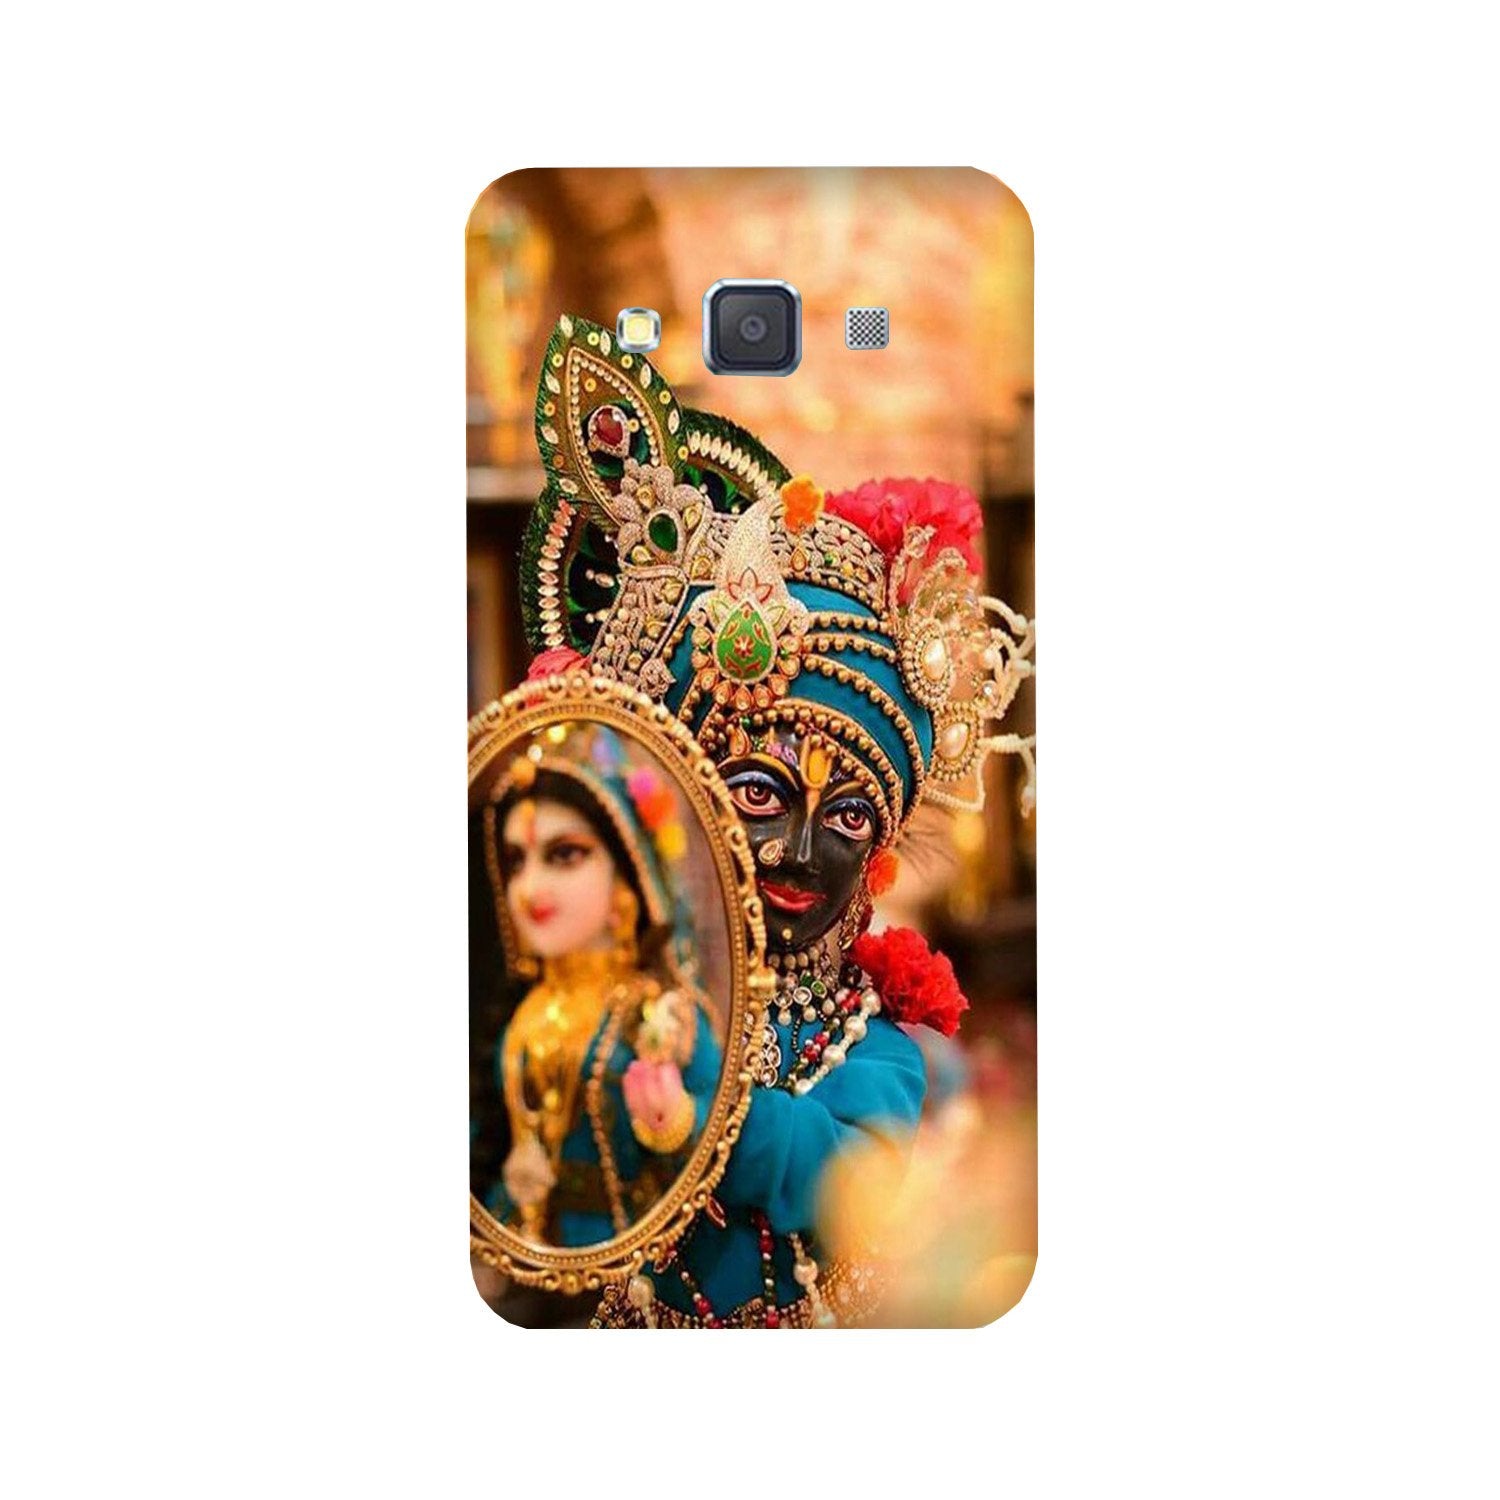 Lord Krishna5 Case for Galaxy ON7/ON7 Pro